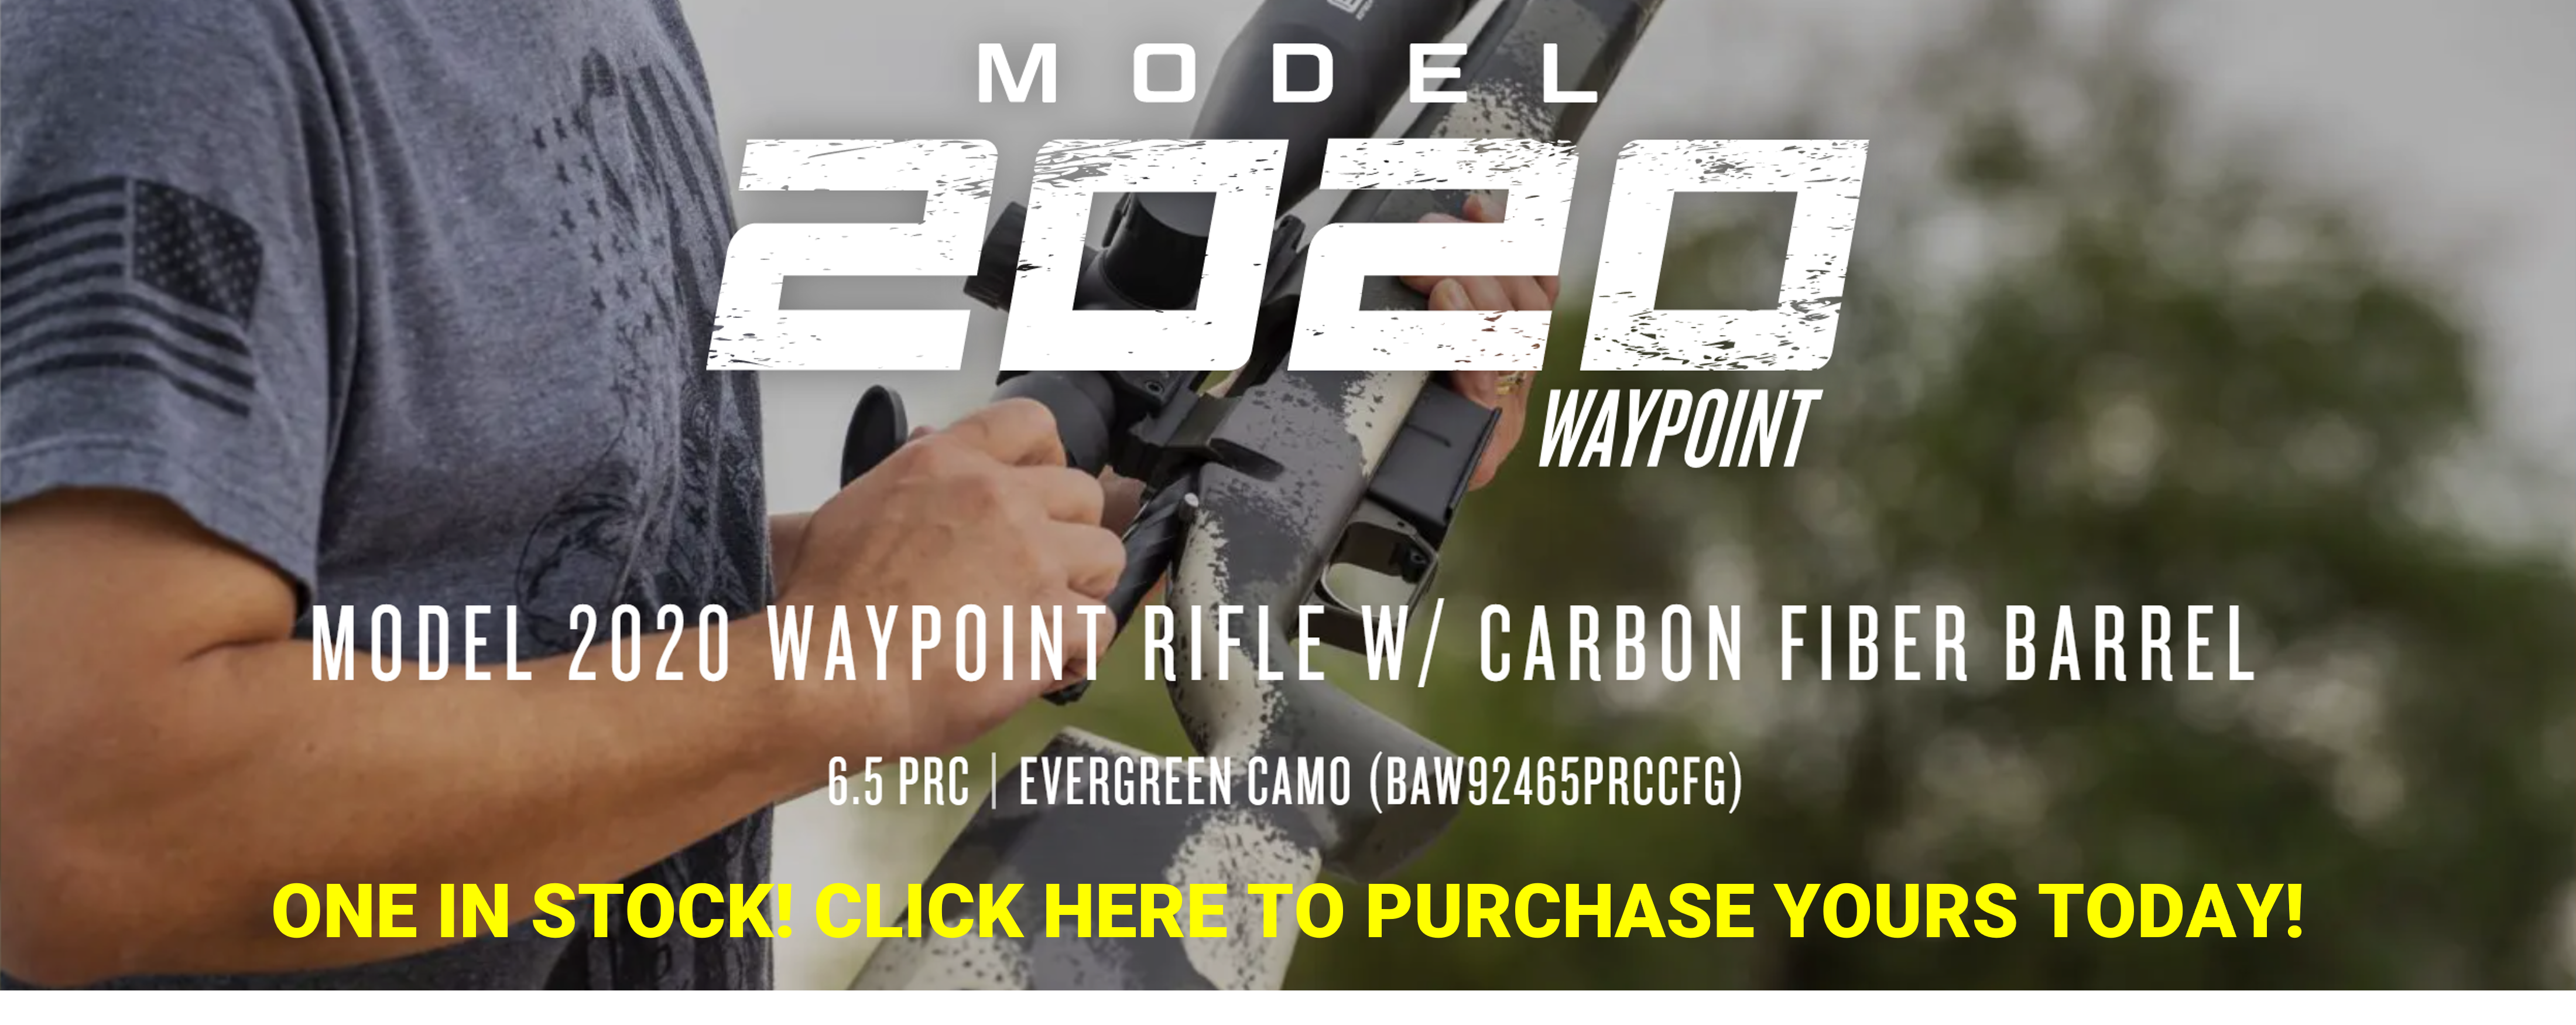 https://www.everydaygunguy.com/products/rifles-springfield-armory-baw92465prccfg-706397939151-5097